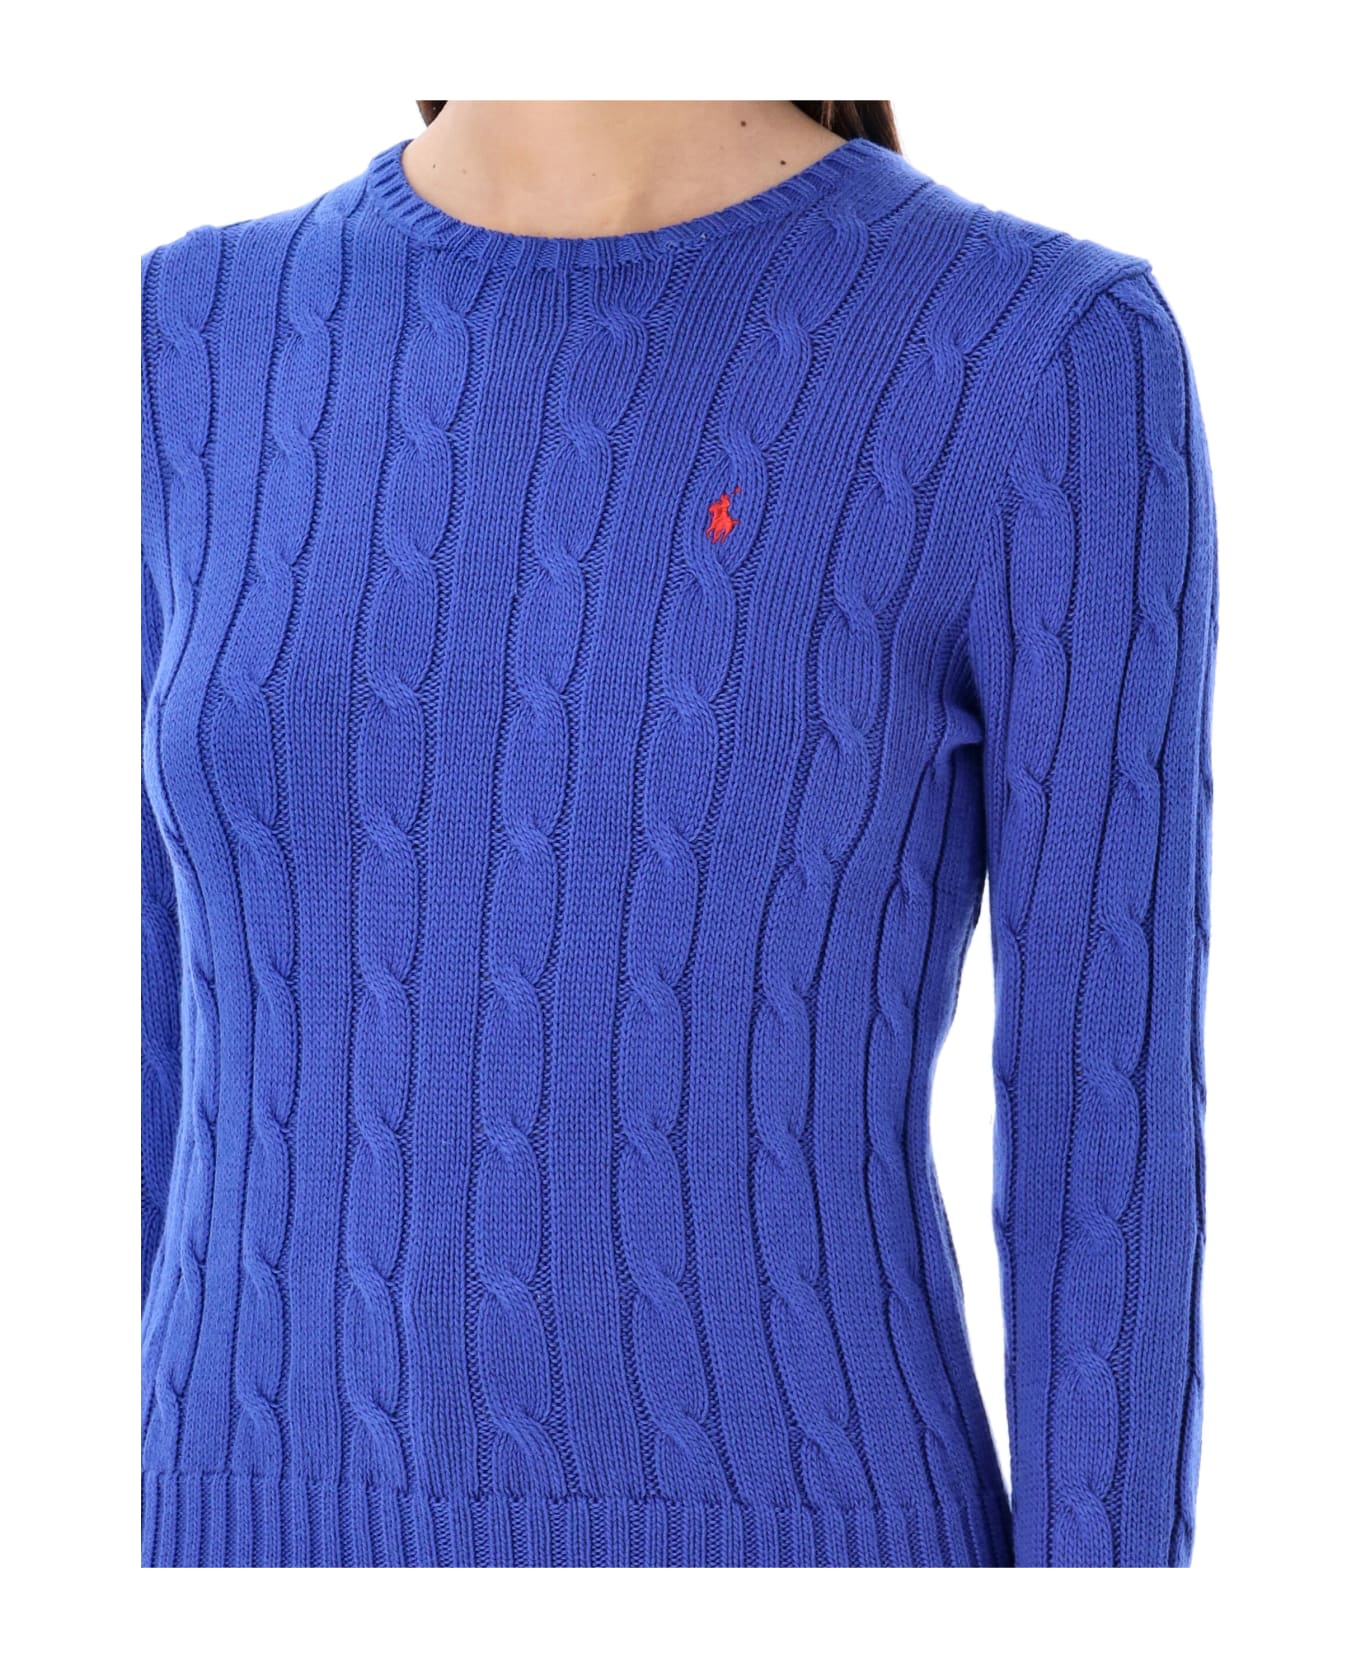 Polo Ralph Lauren Cable-knit Cotton Crewneck Sweater - RUGBY ROYAL